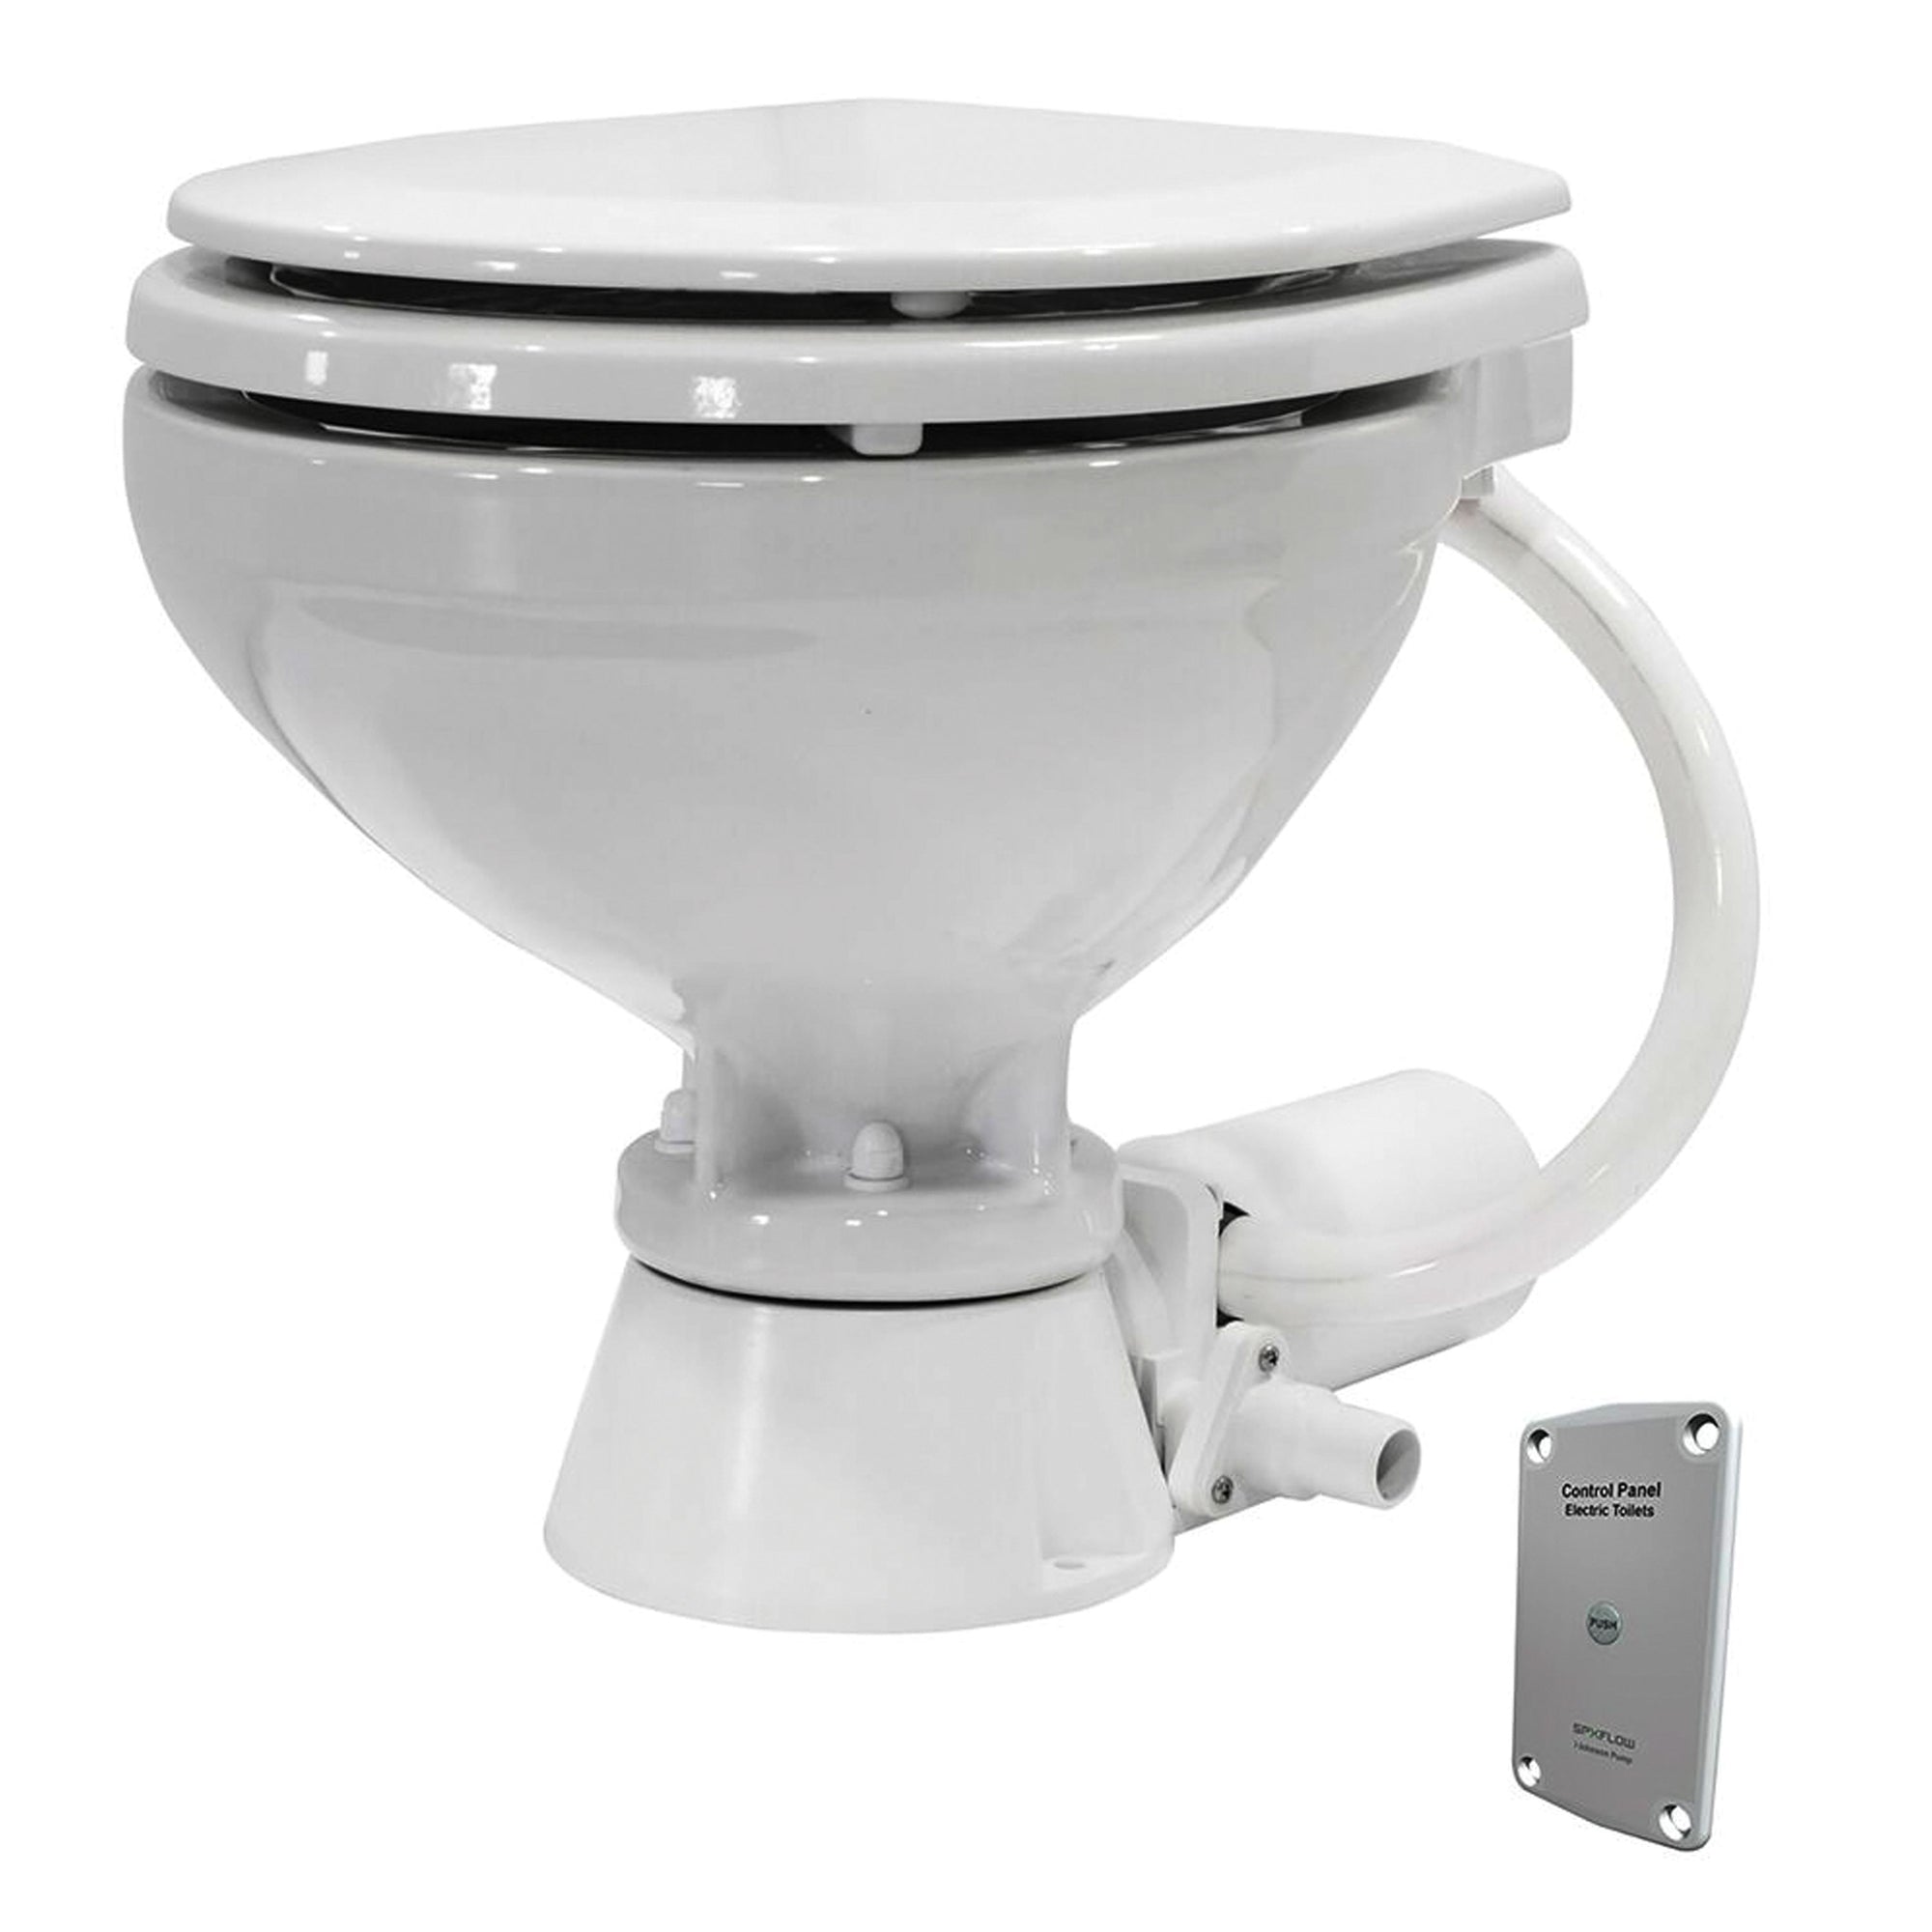 Johnson Pump Standard Electric Compact Toilet, Macerator Style, 12V